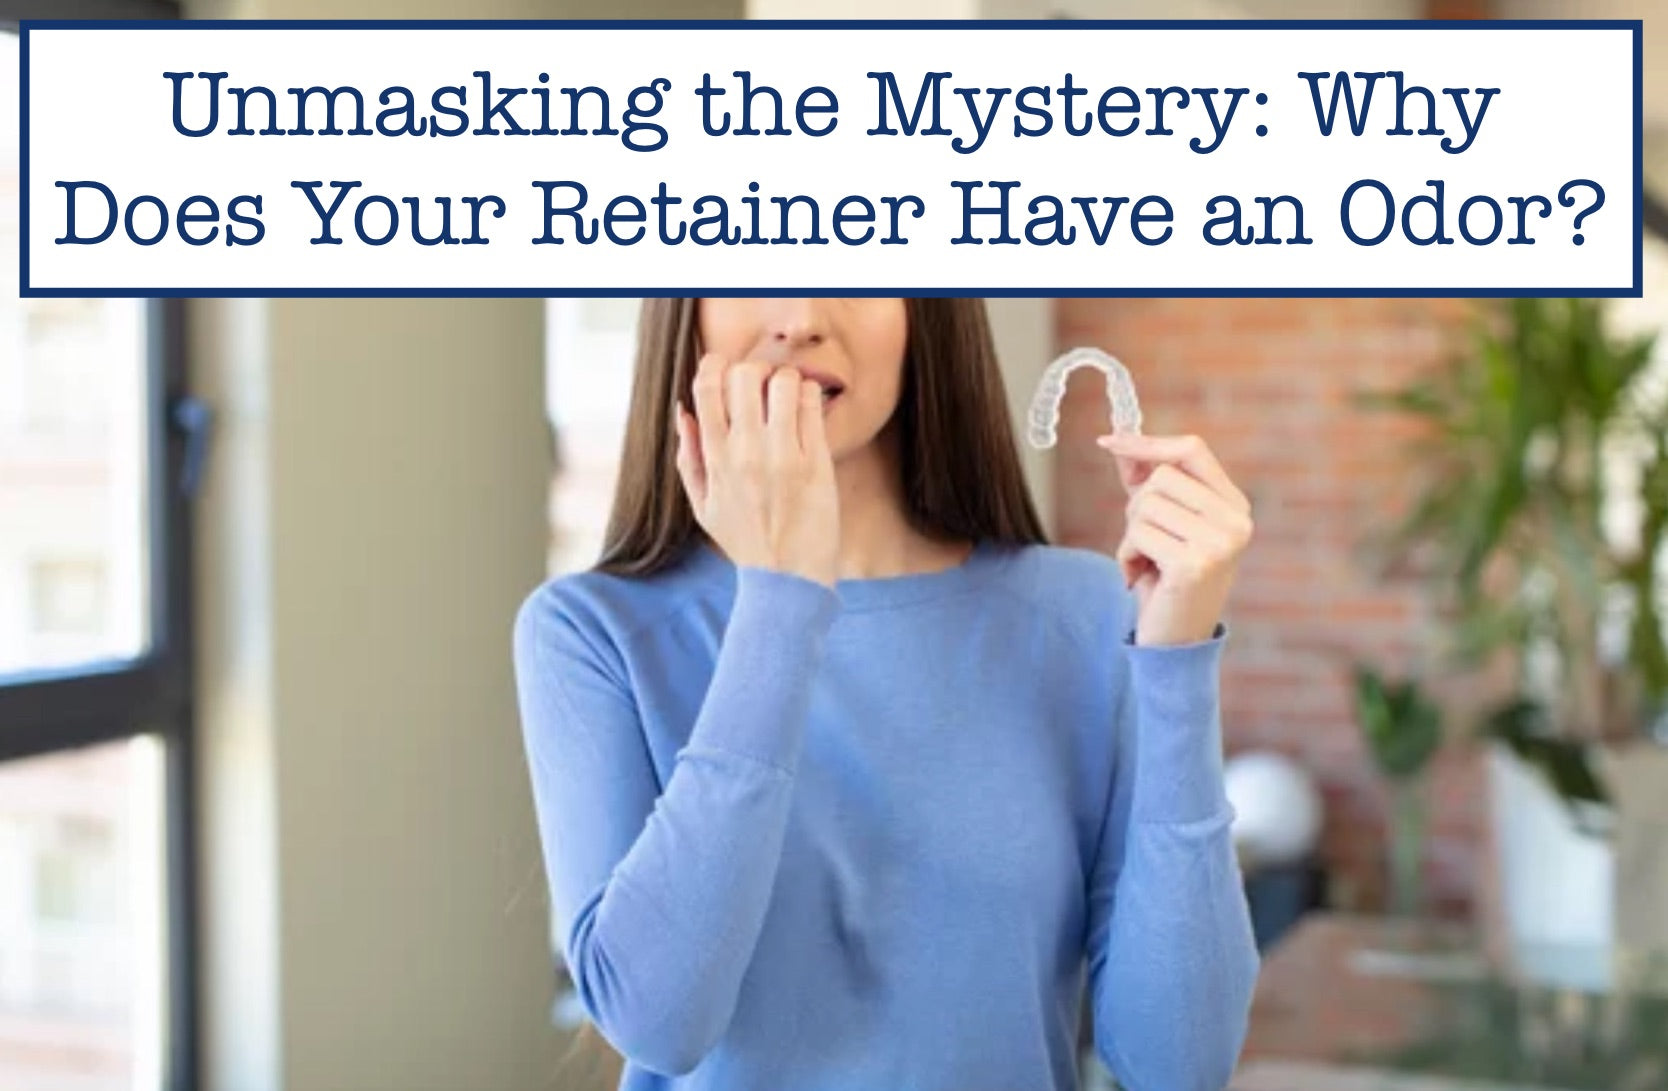 Unmasking the Mystery: Why Does Your Retainer Have an Odor?